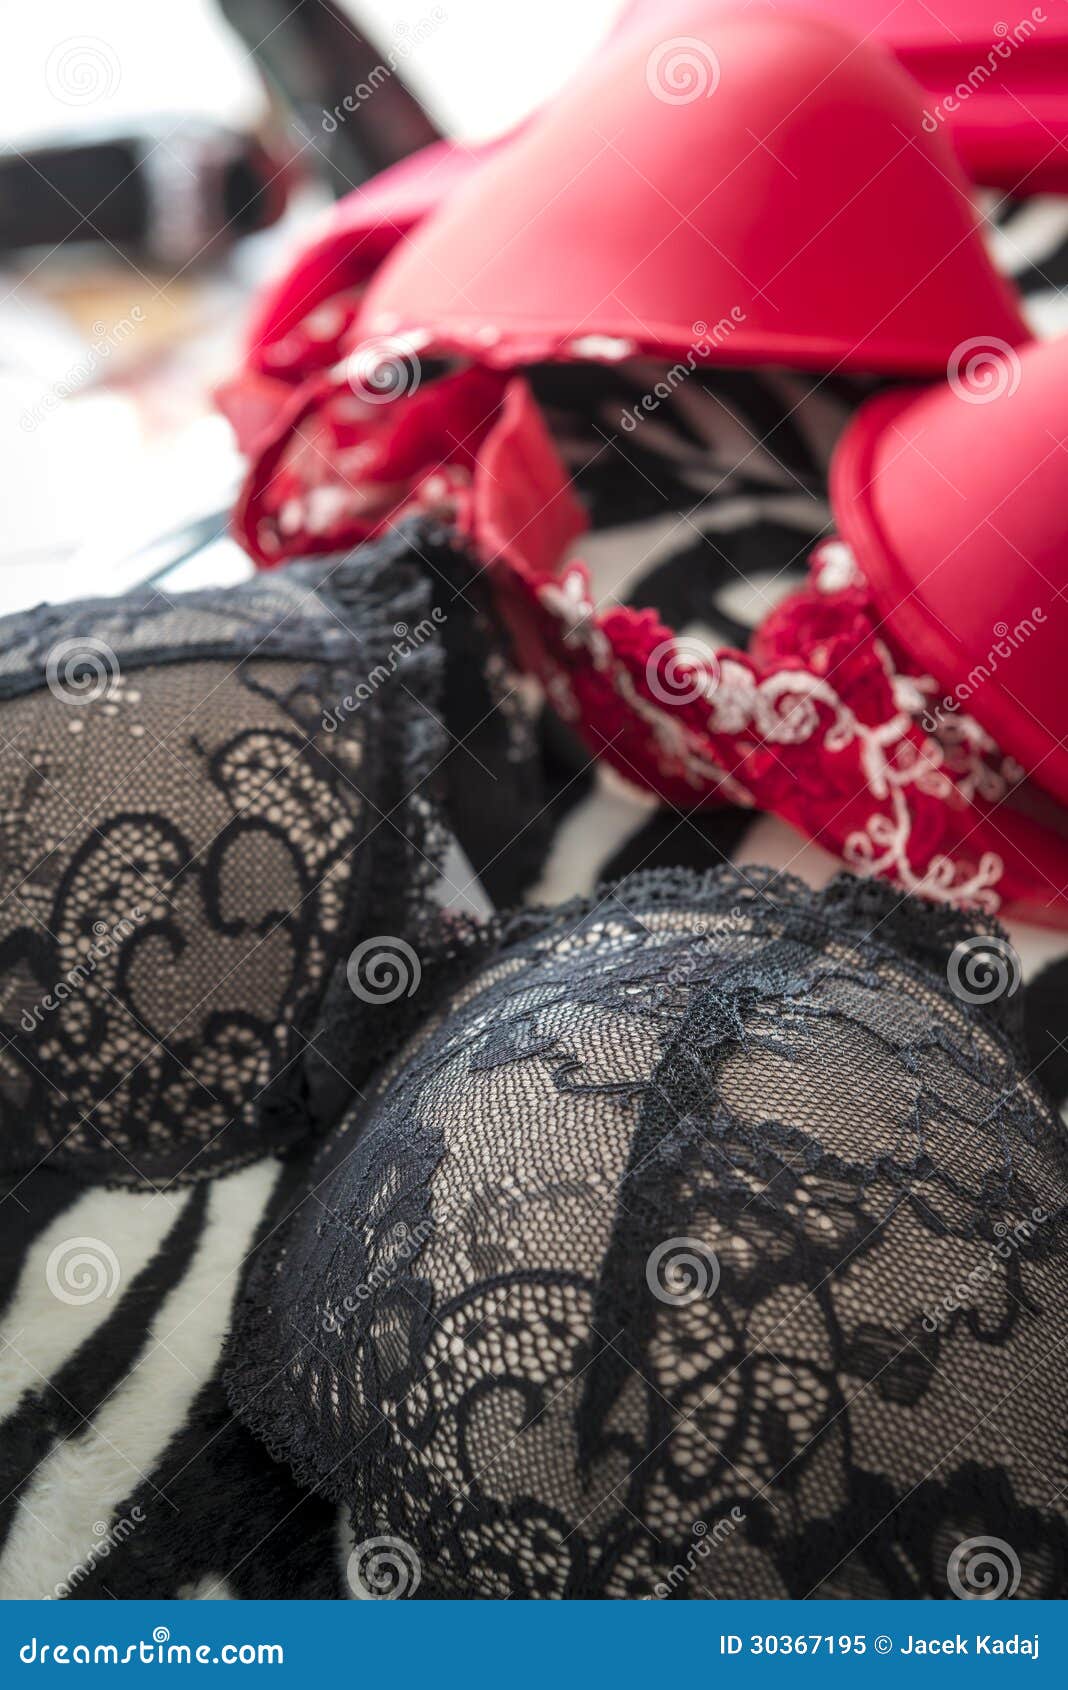 Woman With Big Breasts In Black Bra Stock Photo, Picture and Royalty Free  Image. Image 48758898.